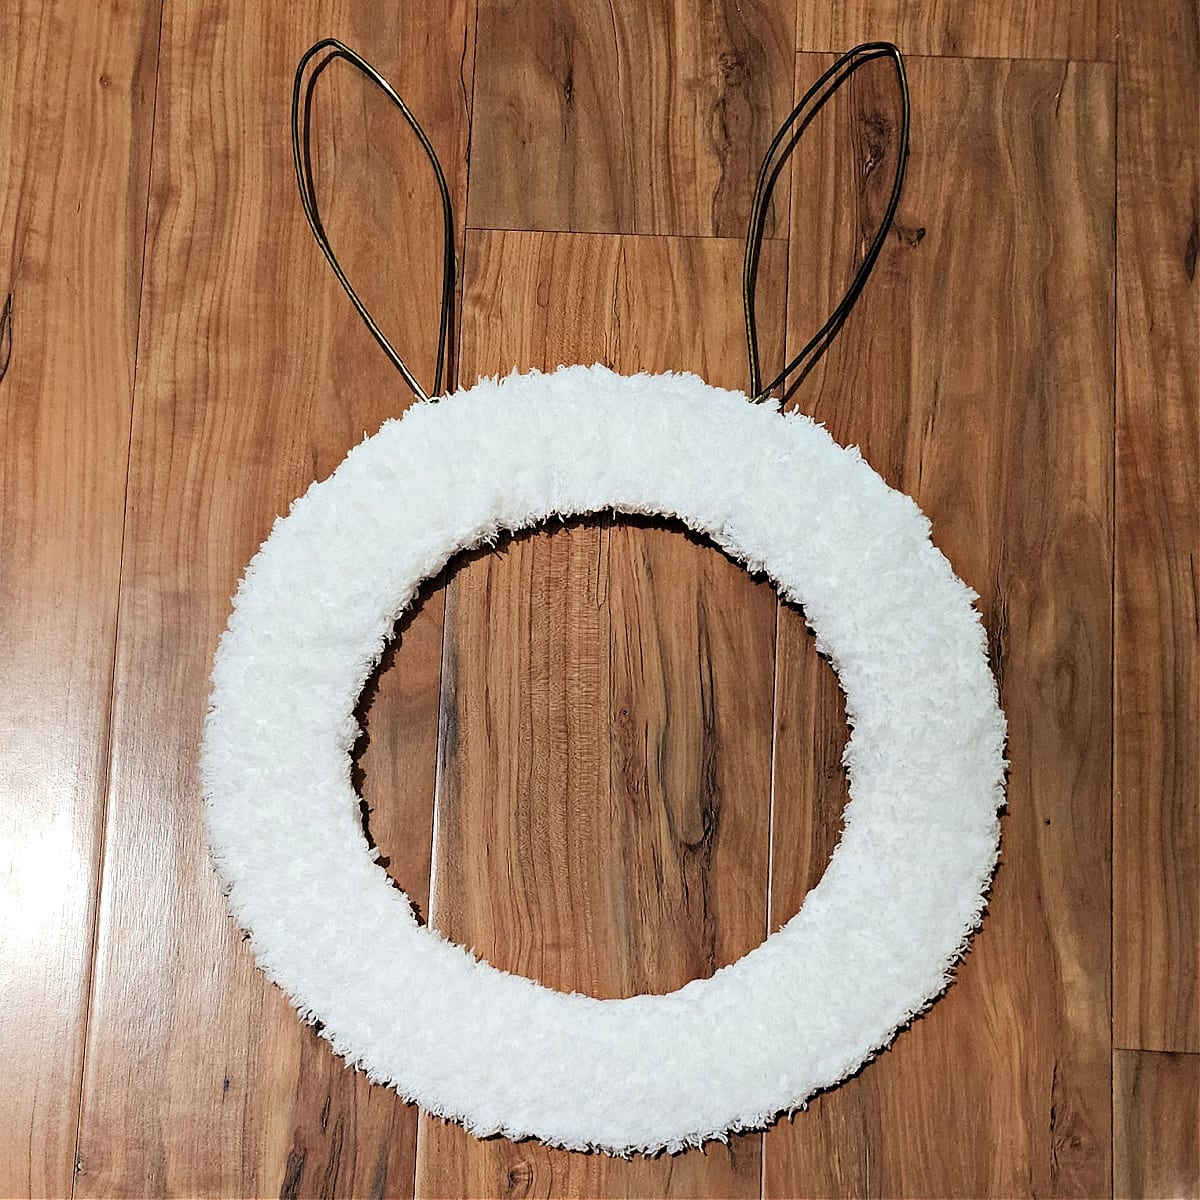 Bunny head wreath wrapped with white pipsqueak yarn.